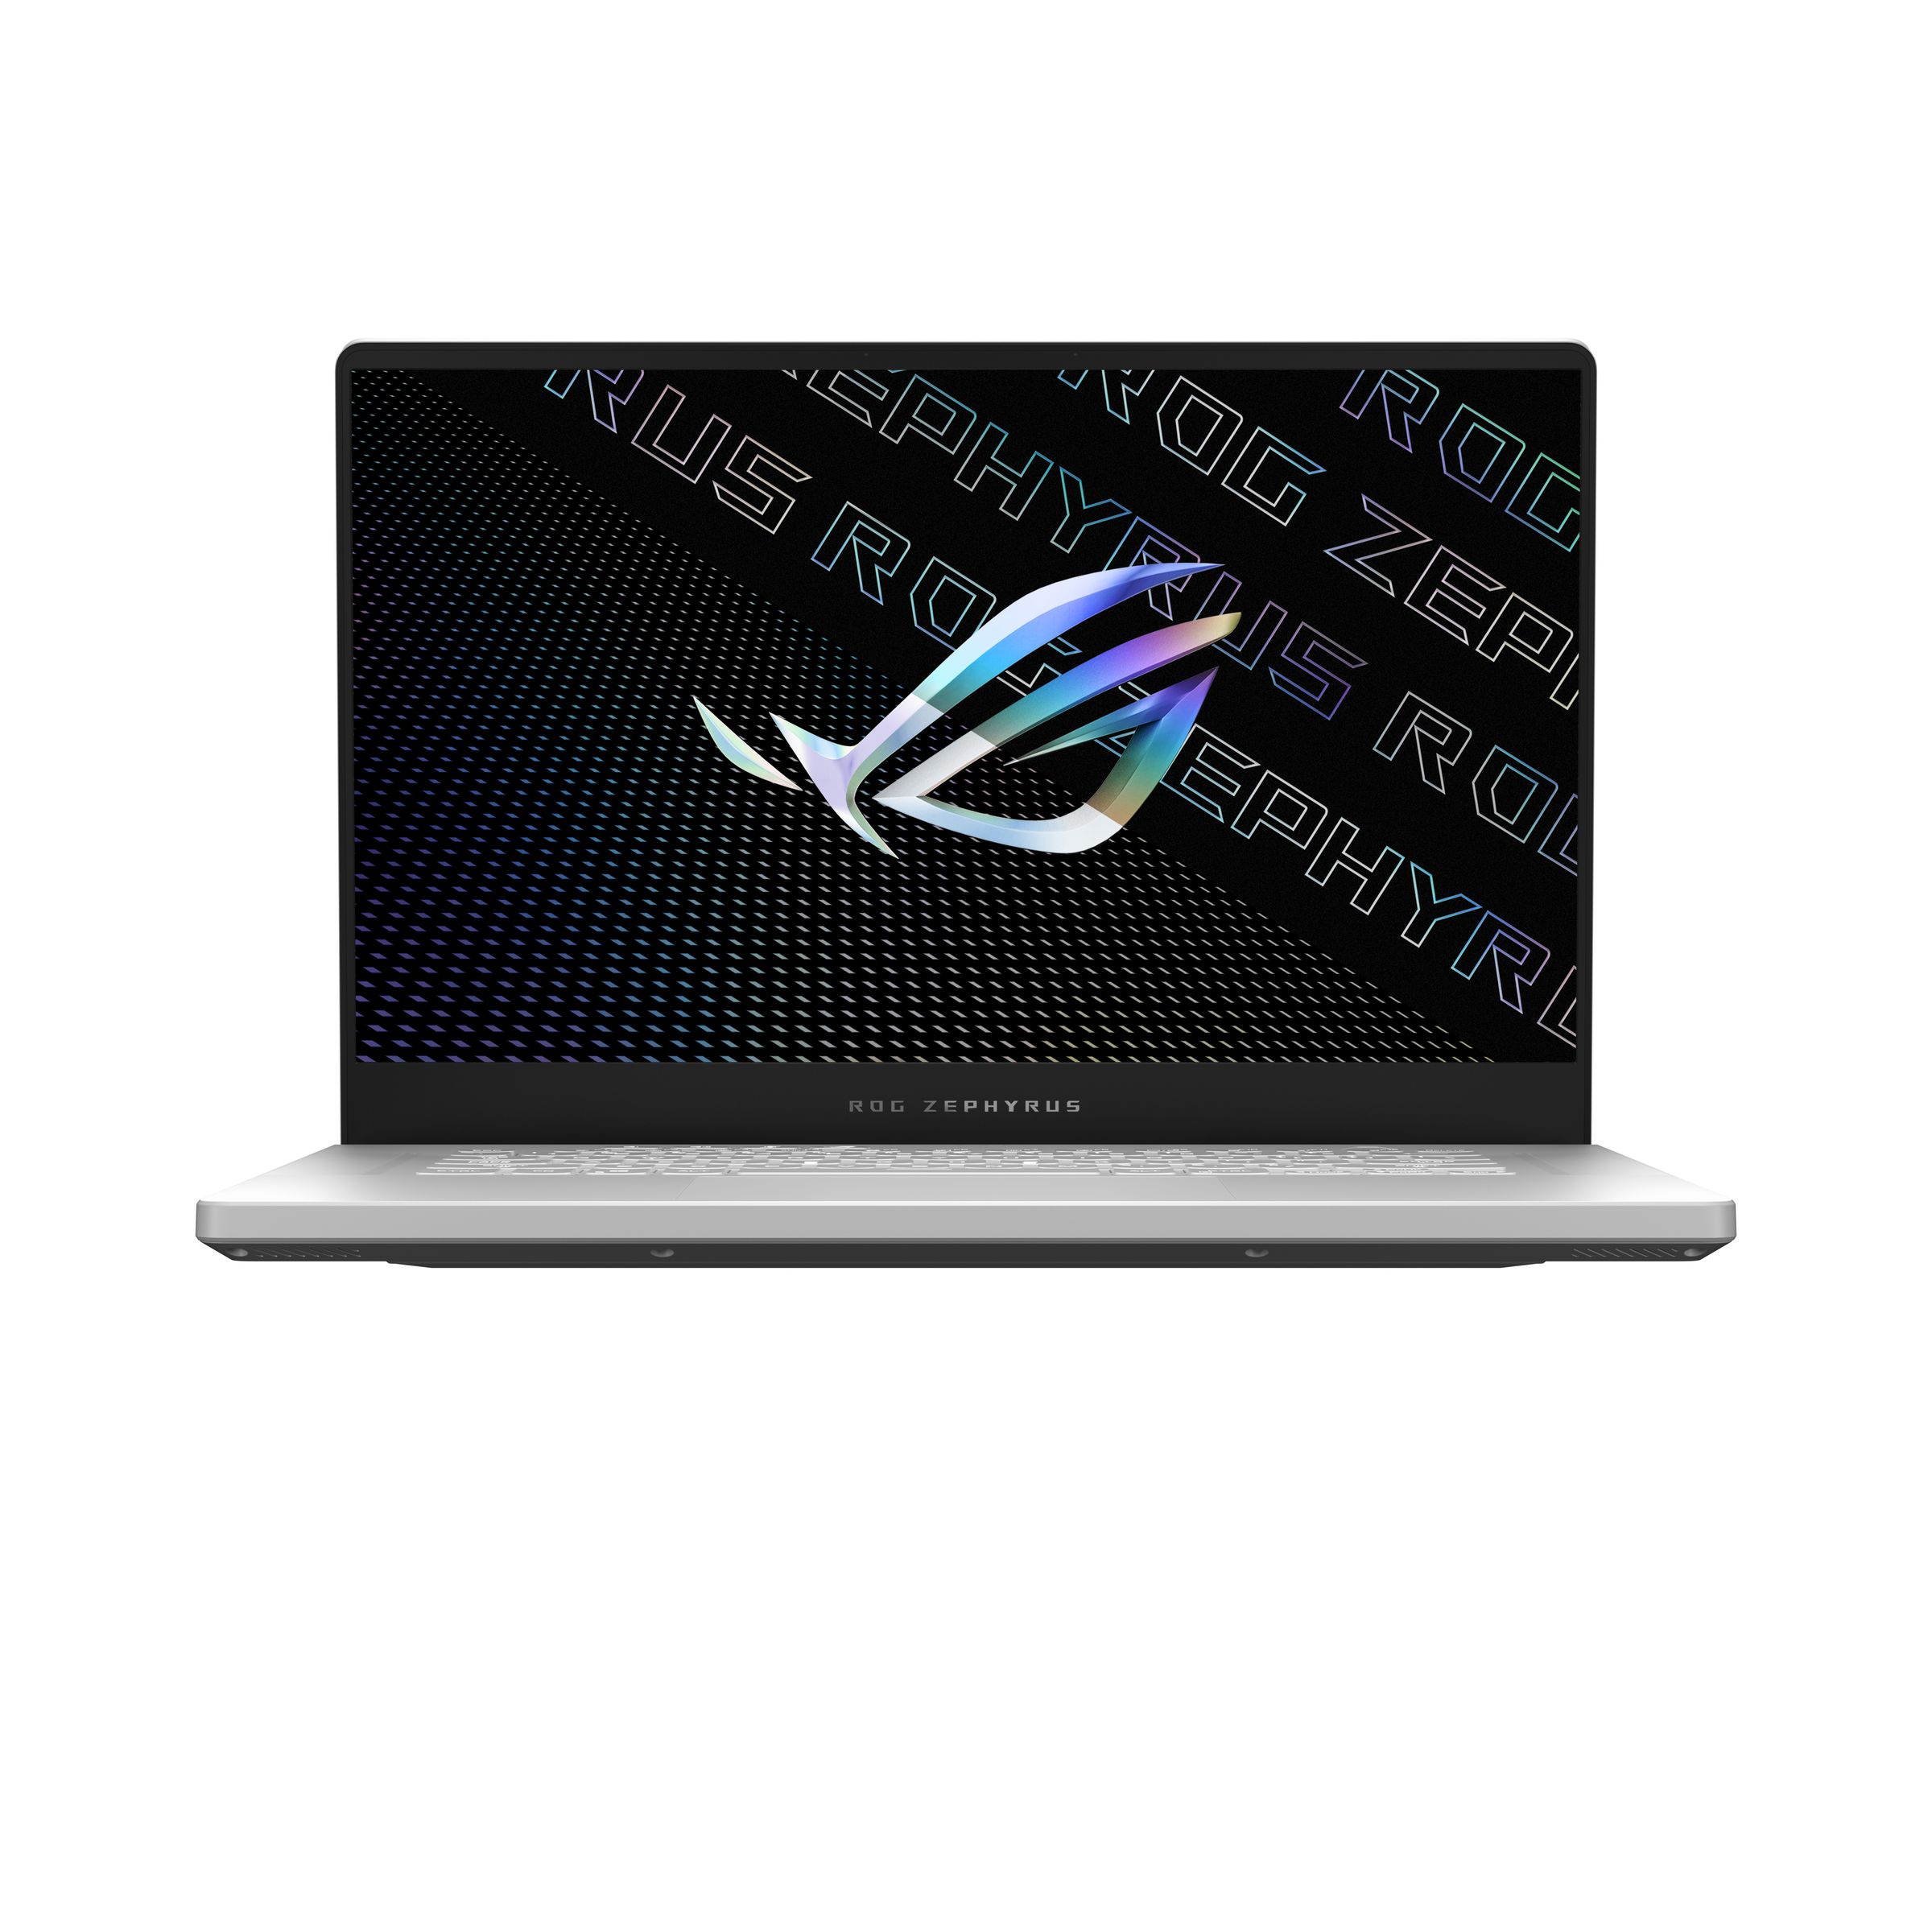 The Zephyrus G15 in Moonlight White faces the camera, open. The screen displays the ROG logo.